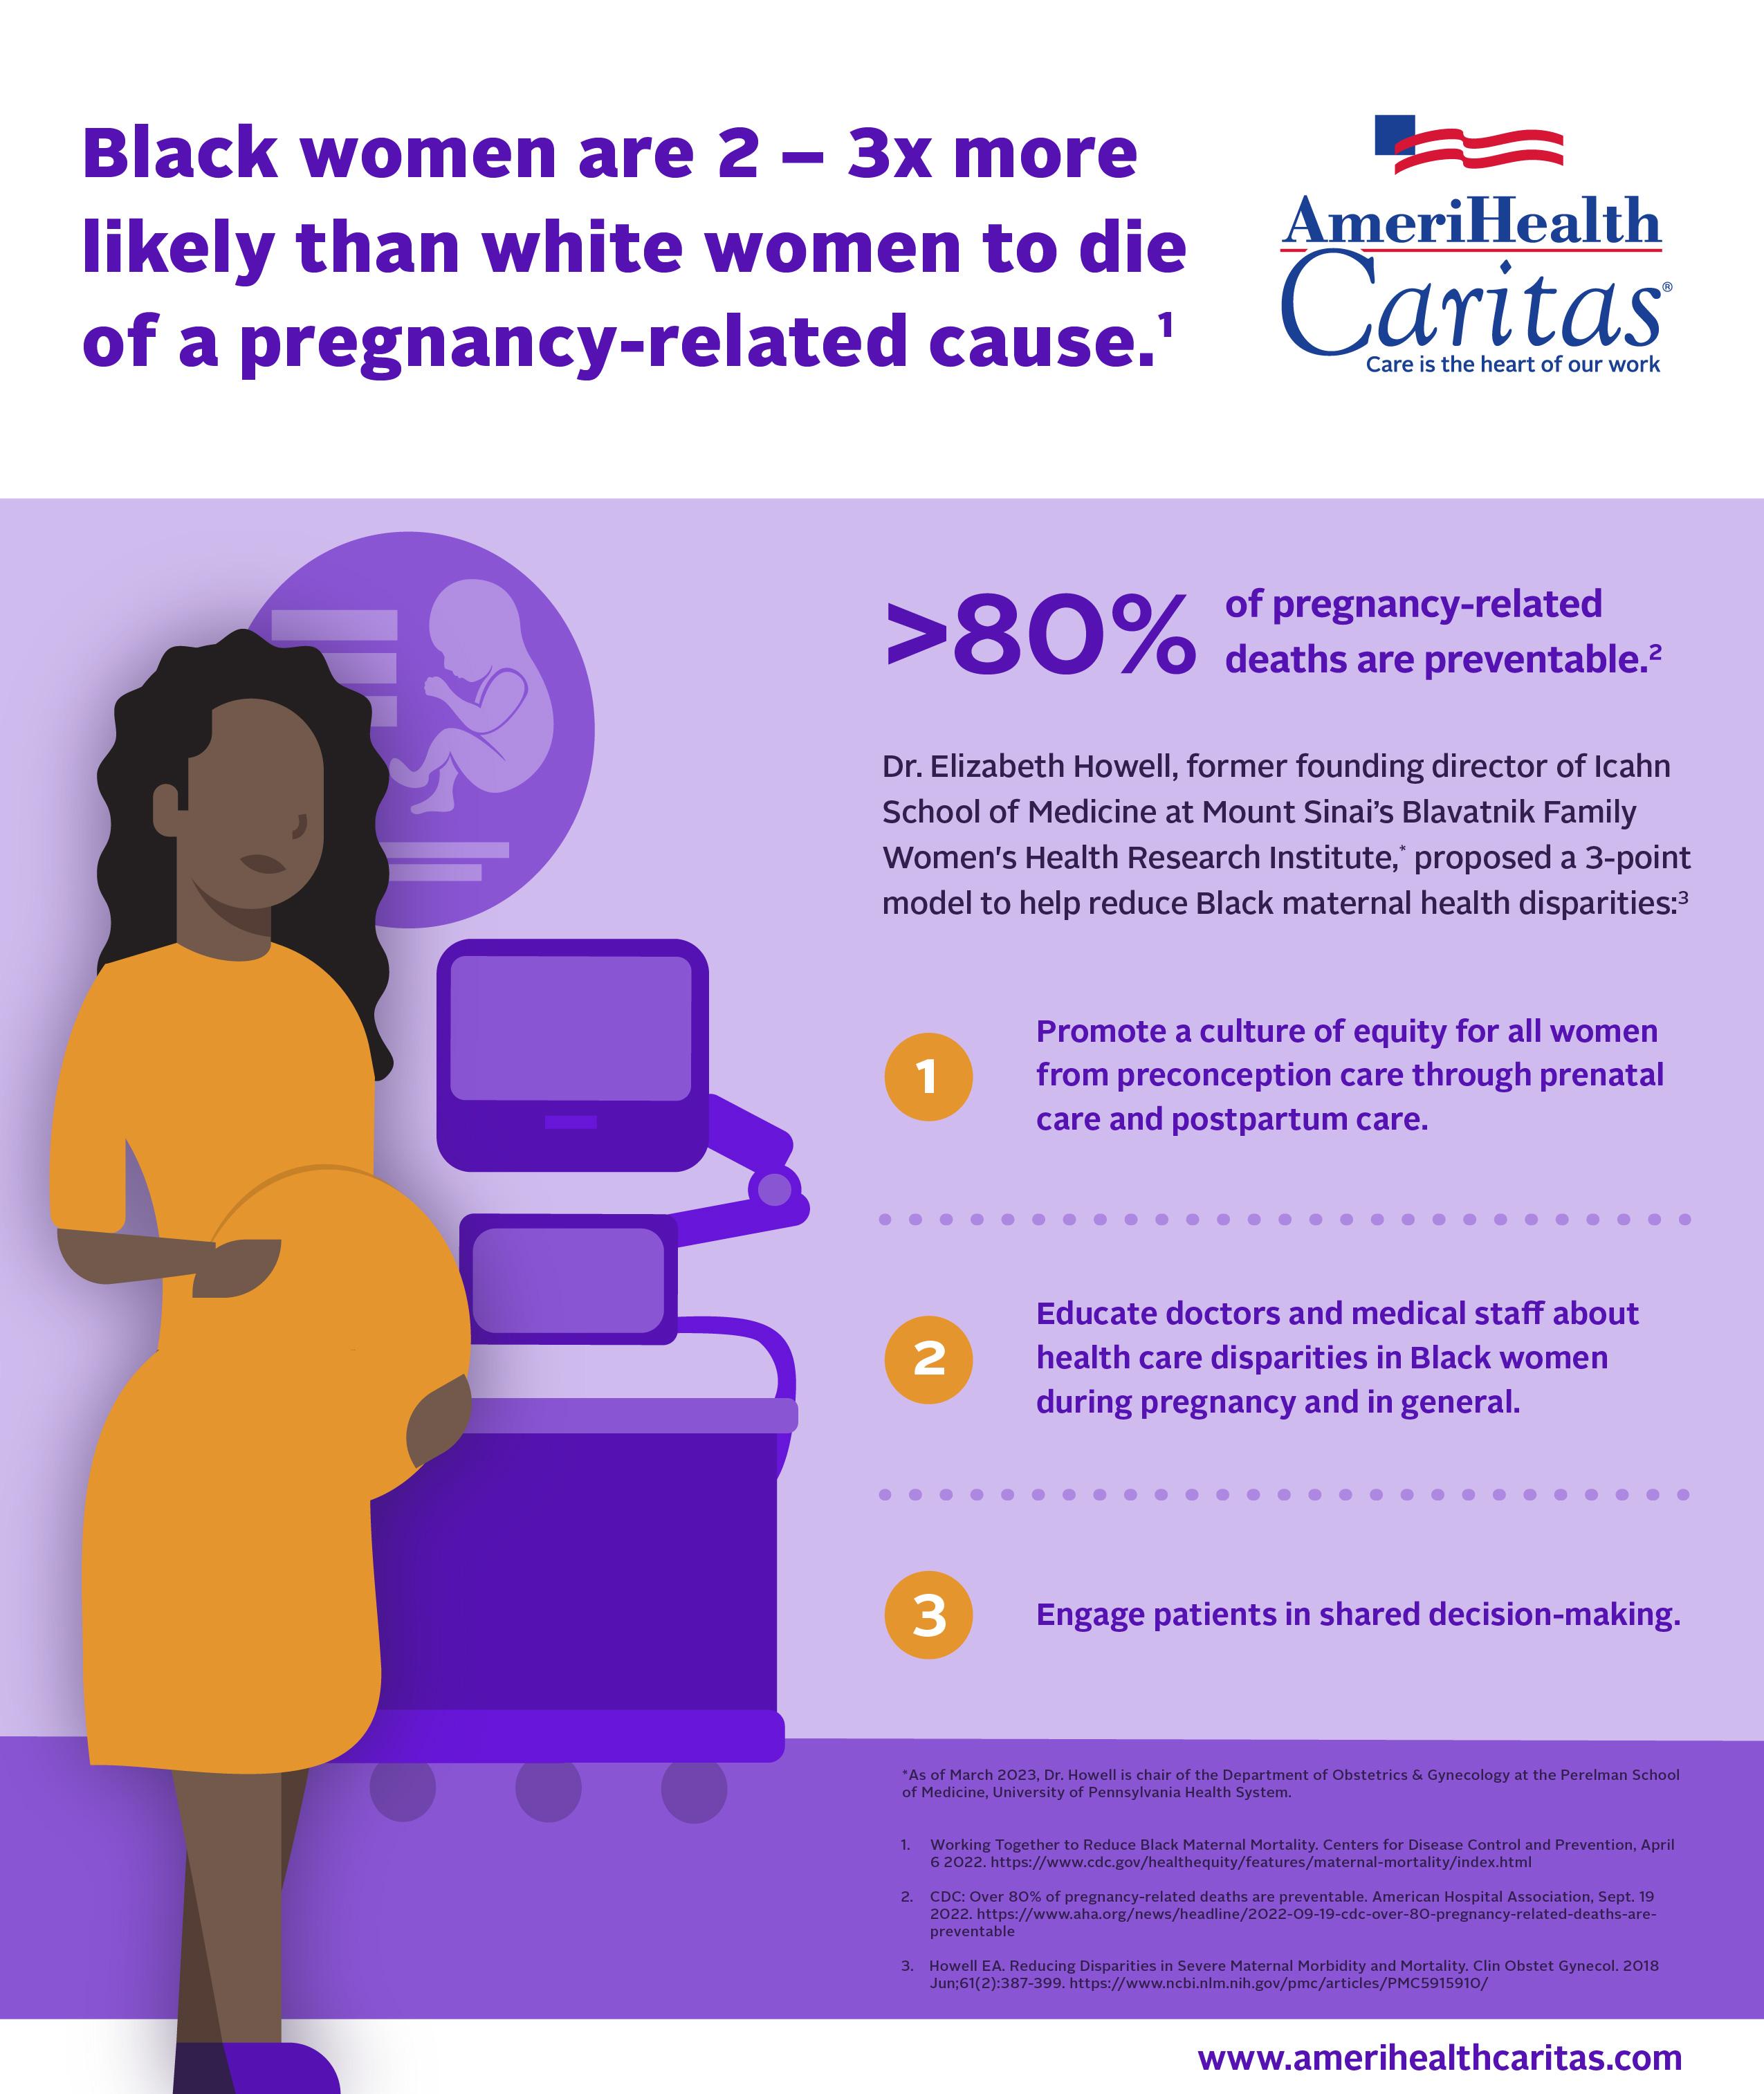 Take Action Now to Curb Maternal Deaths Among Black Women